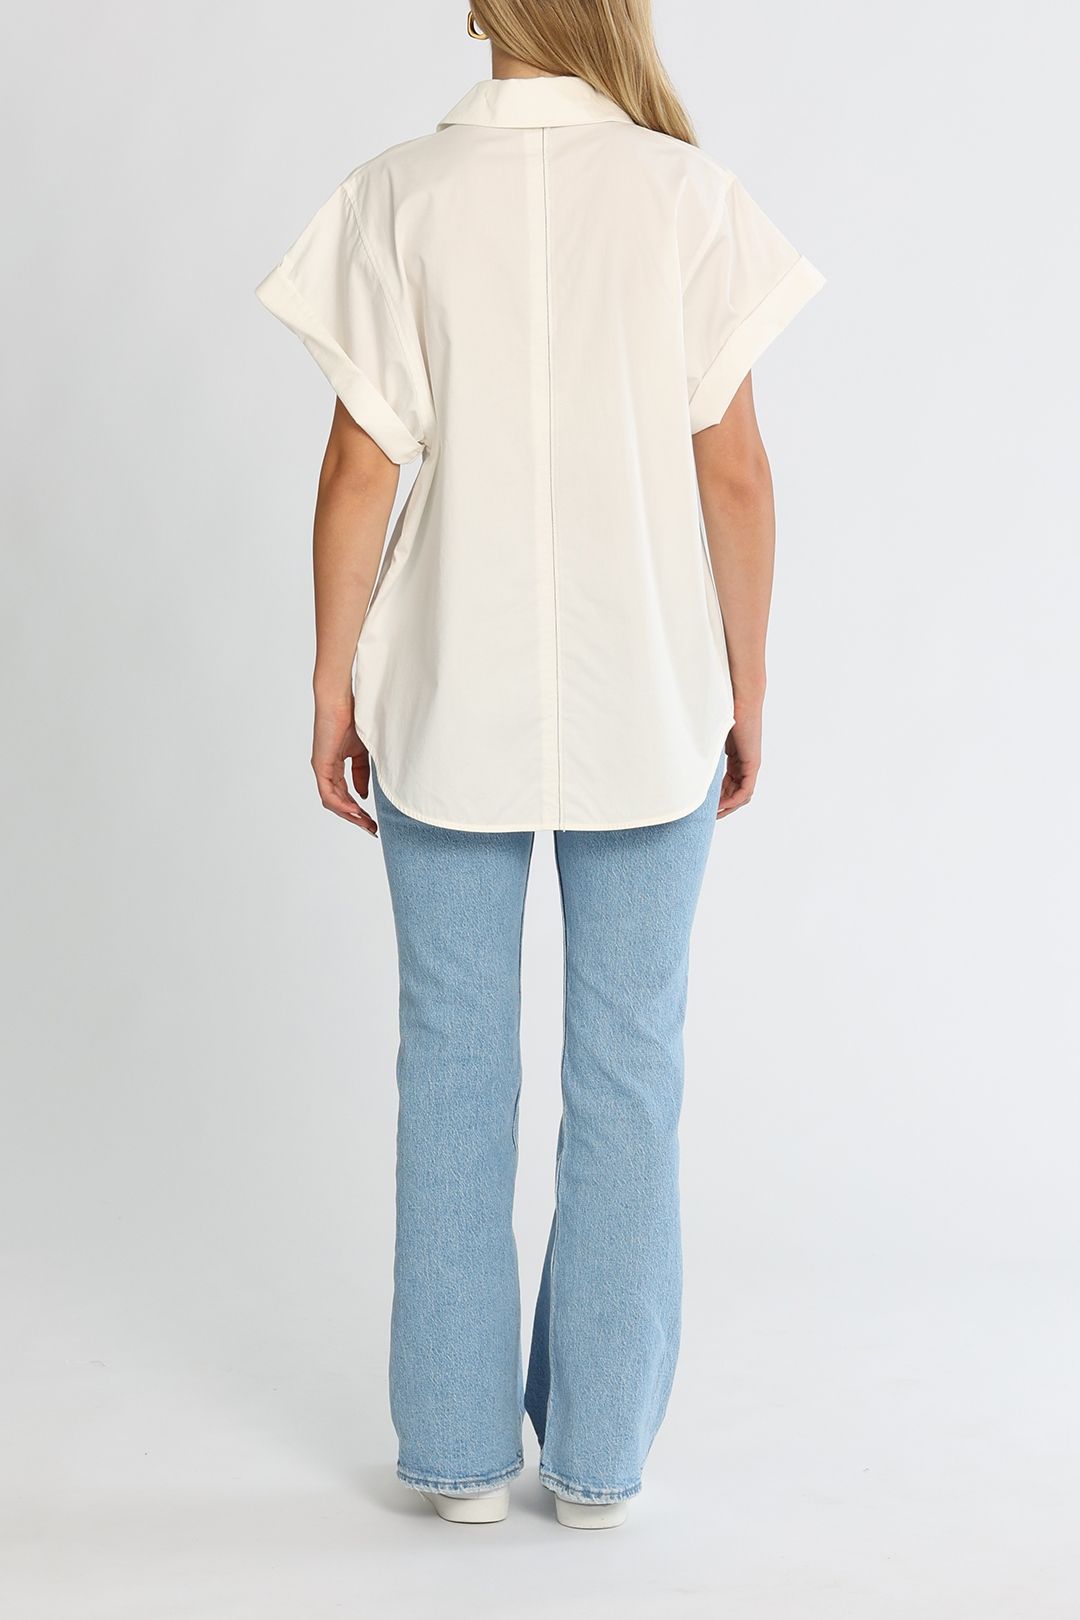 Camilla and Marc Farlow Shirt White Relaxed Fit